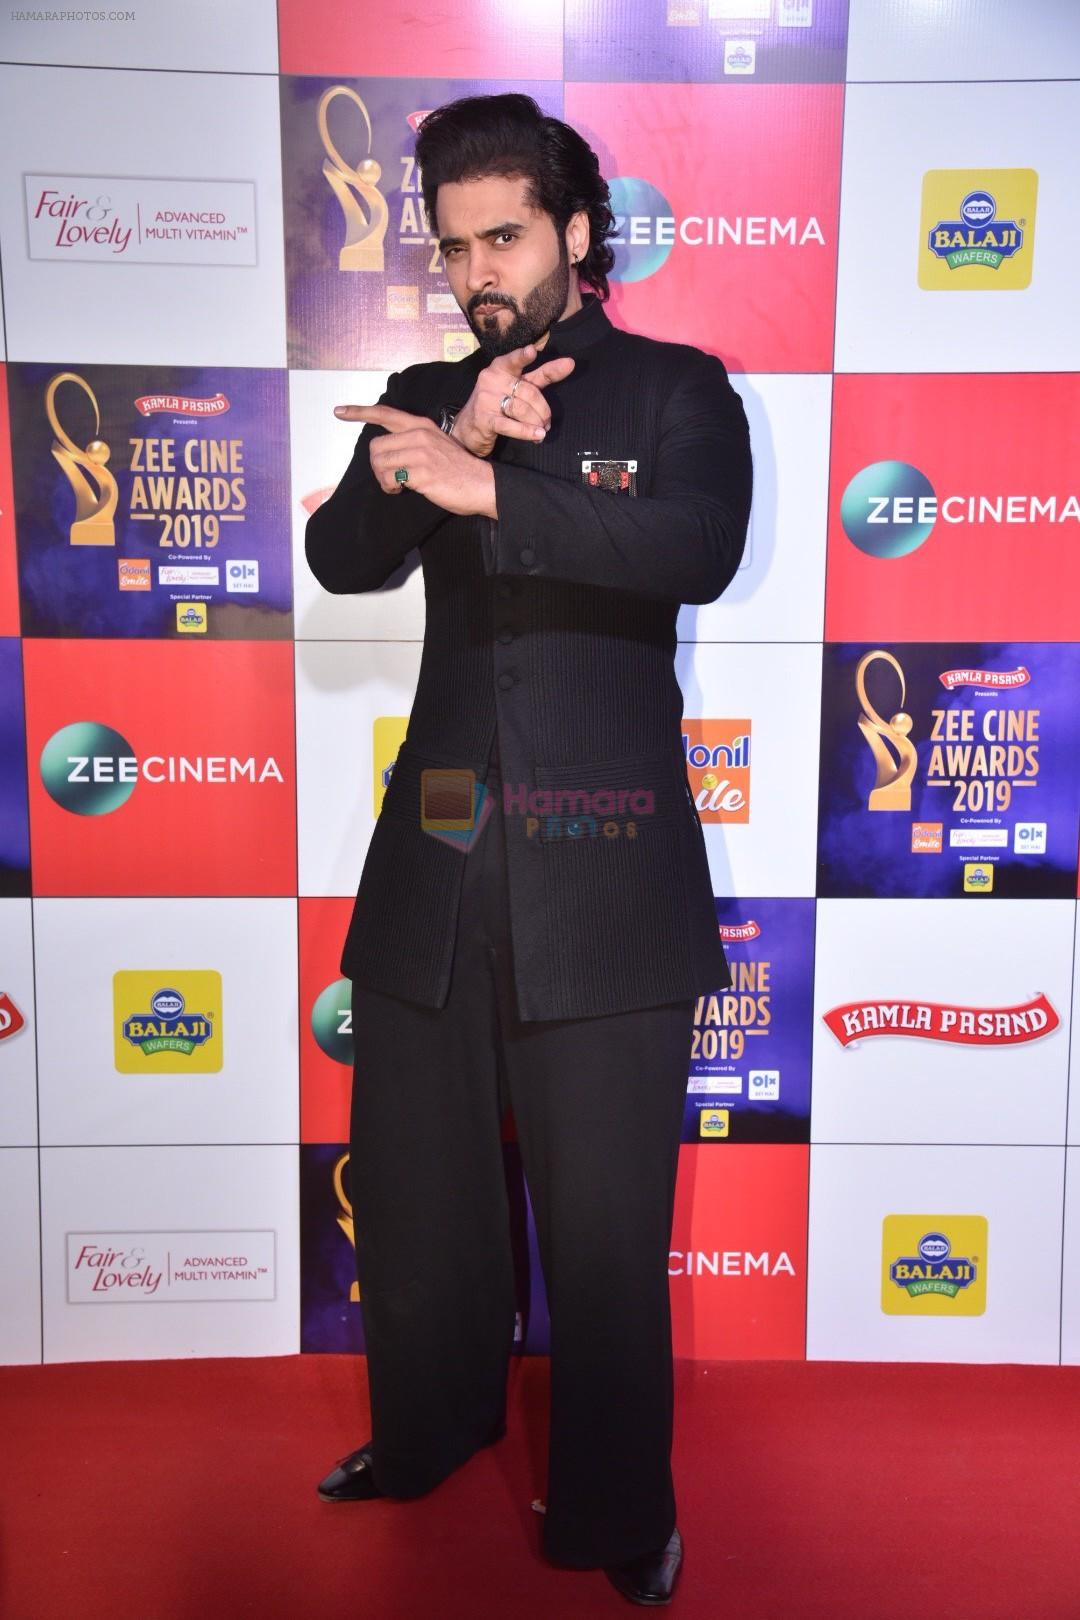 Jackky Bhagnani at Zee cine awards red carpet on 19th March 2019